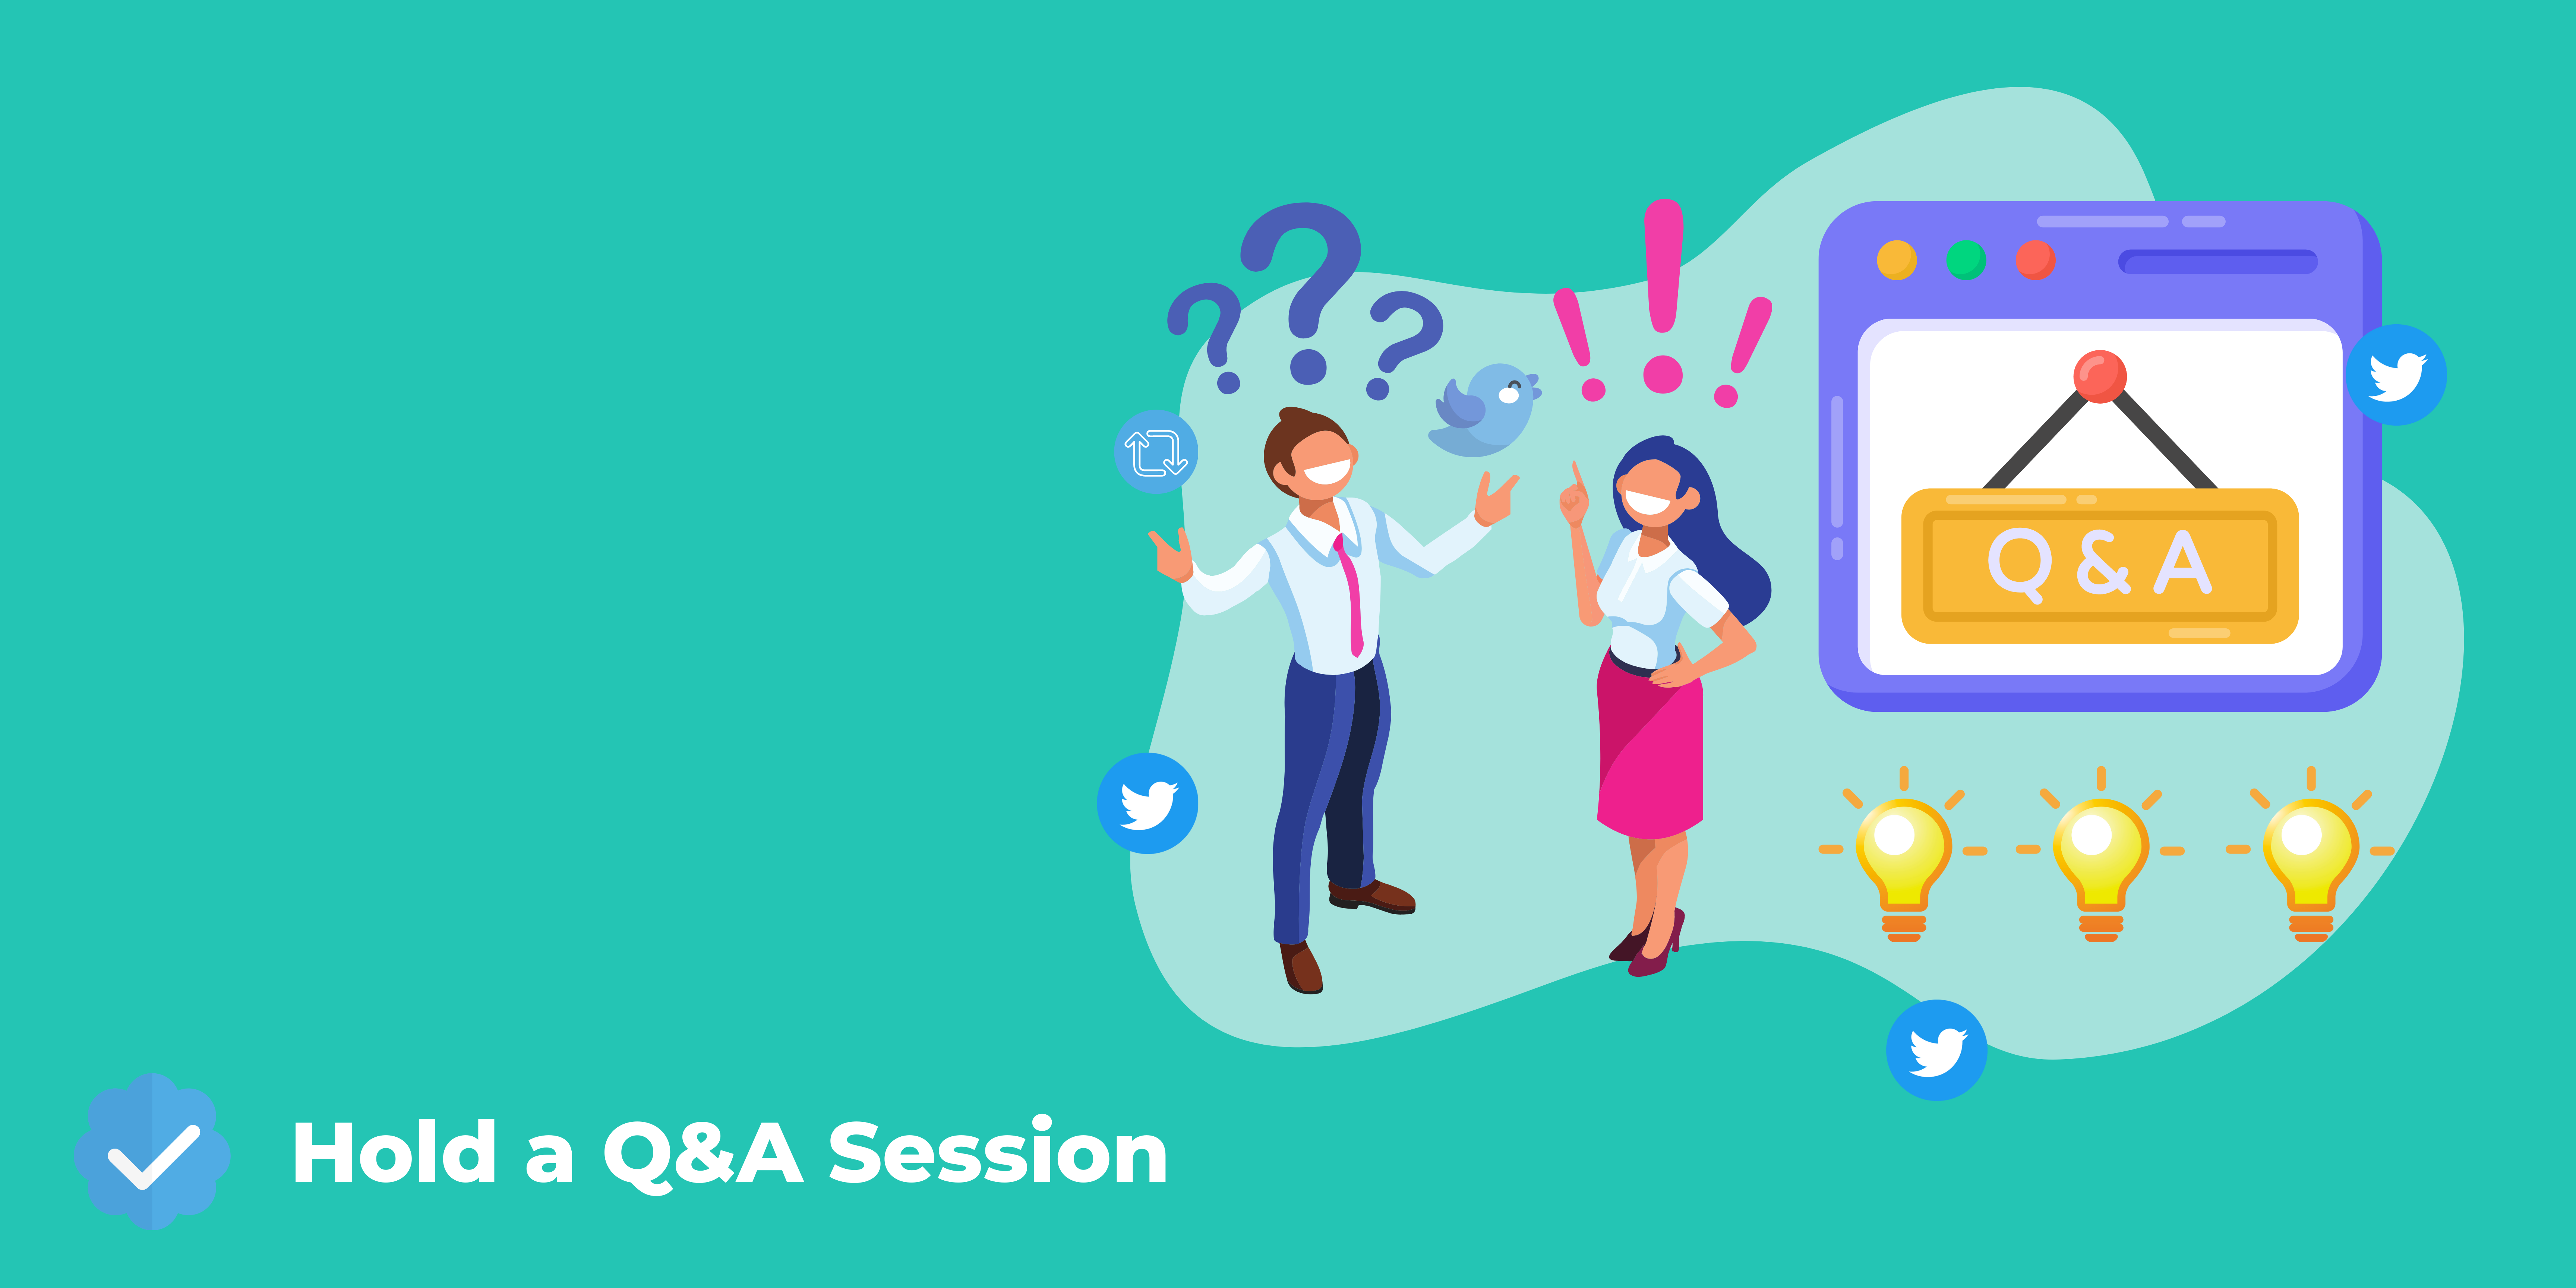 Twitter Space Q&A